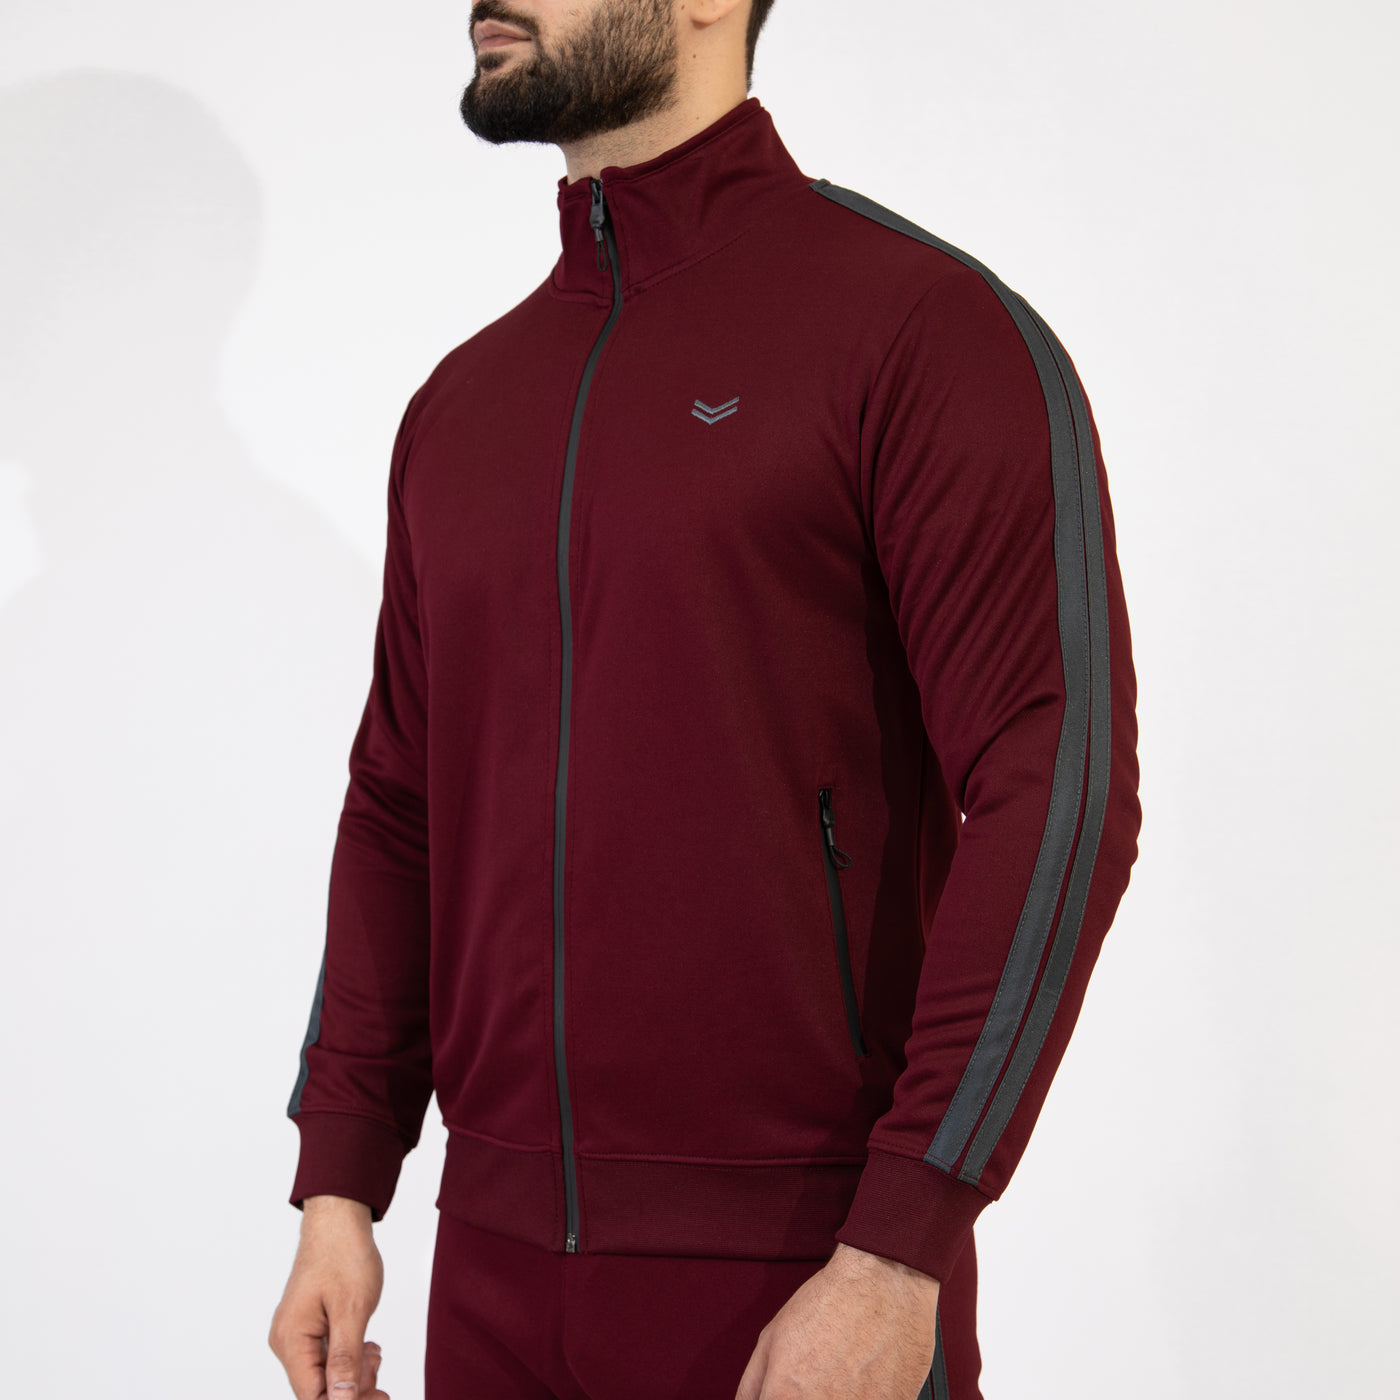 Maroon Quick Dry Mock Neck Zipper Jacket with Two Gray Stripes